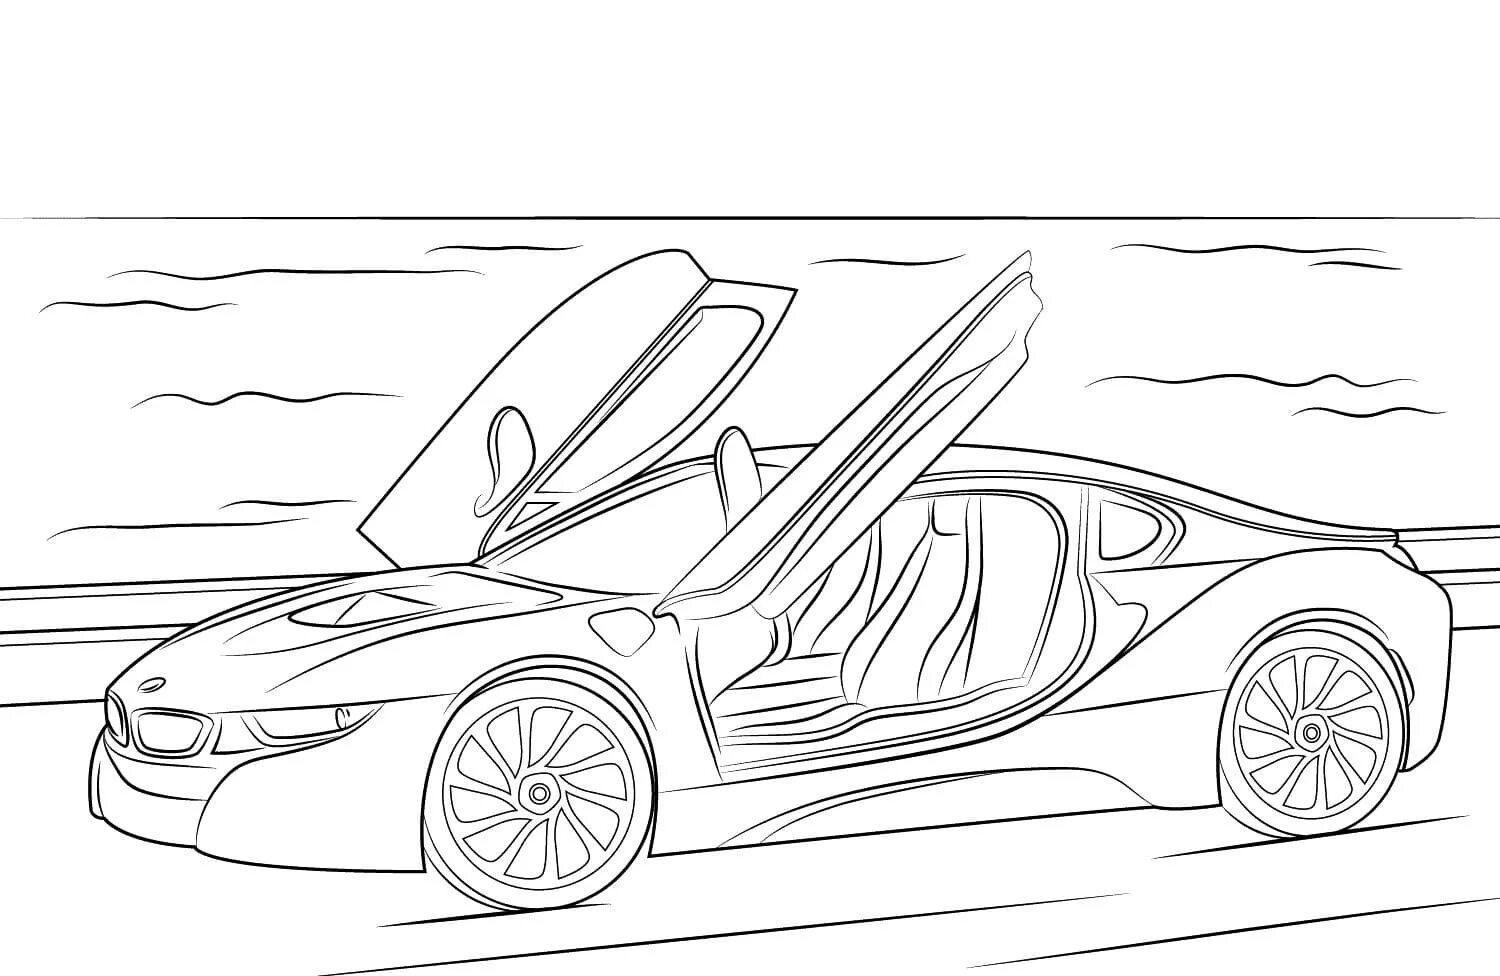 Grand bmw racing coloring page